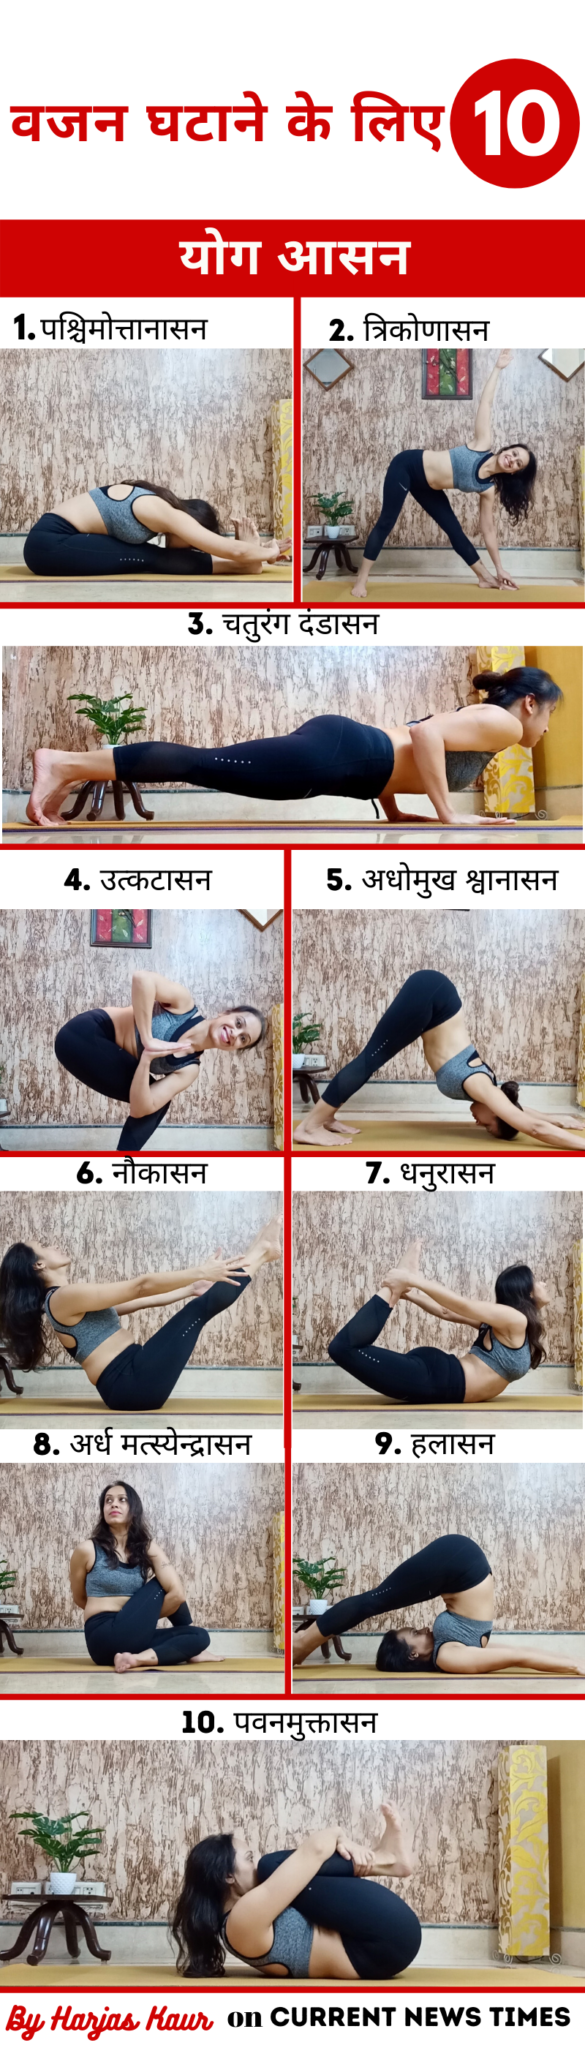 10-Top-Yoga-Poses-for-Weight-Loss-in-hindi